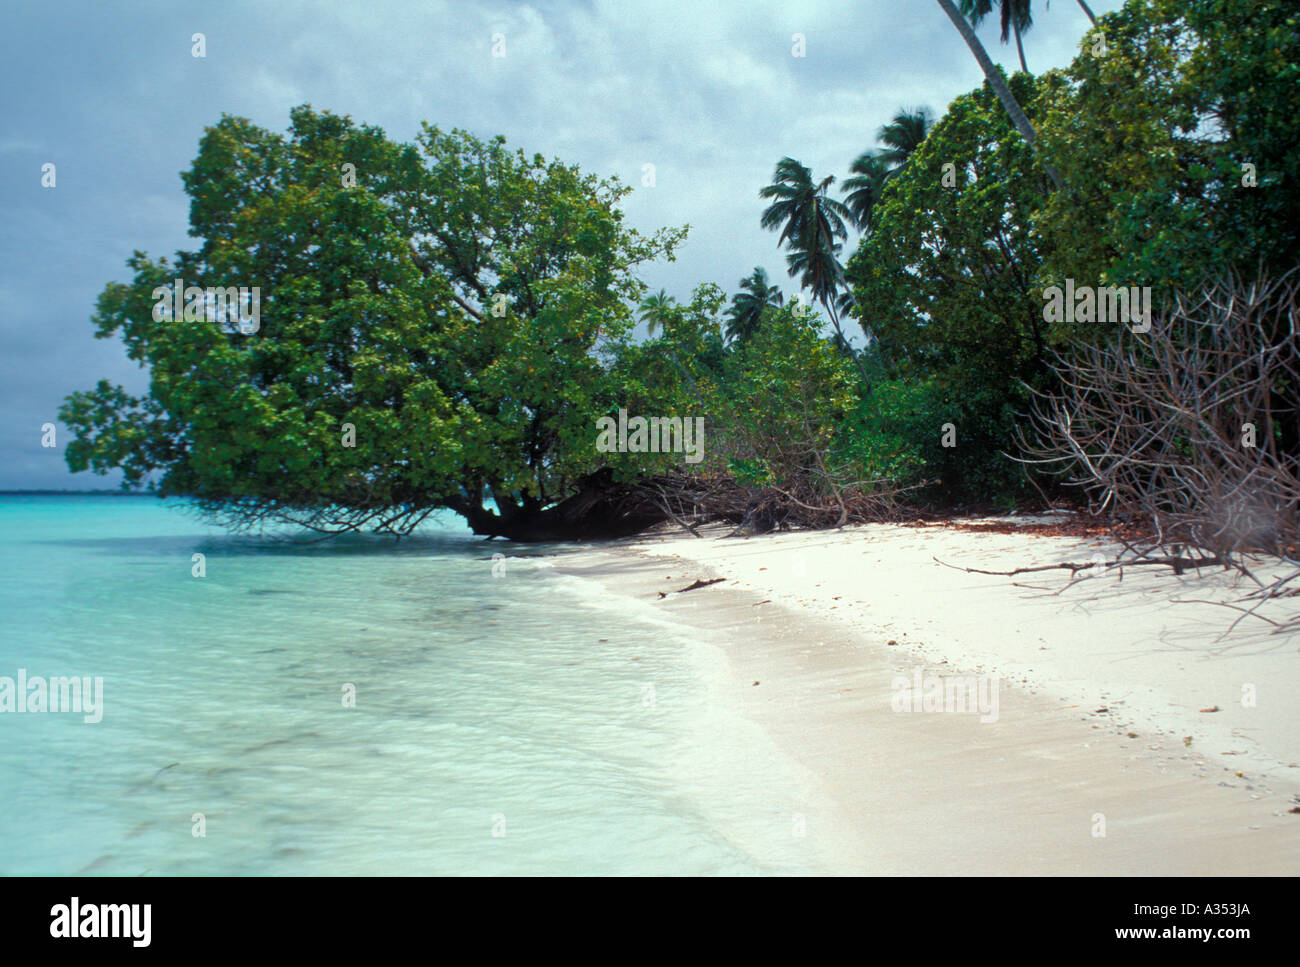 Beach with mangrove and palm trees Diego Garcia Islands in the Indian ...